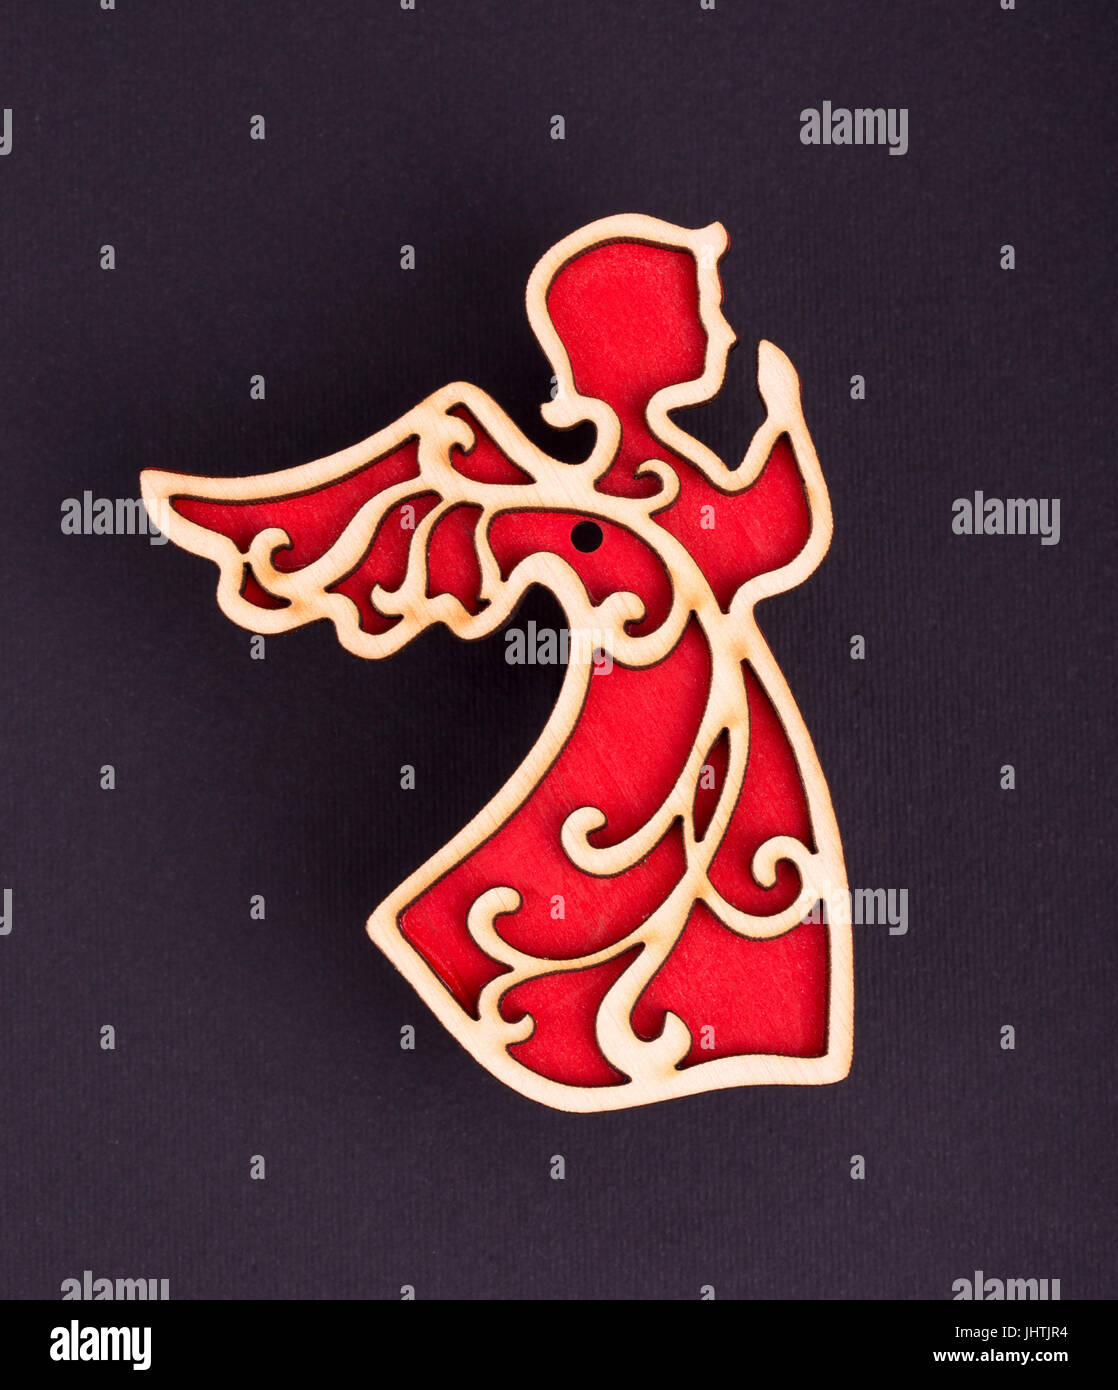 Christmas decorations of red angels on a on a black background Stock Photo